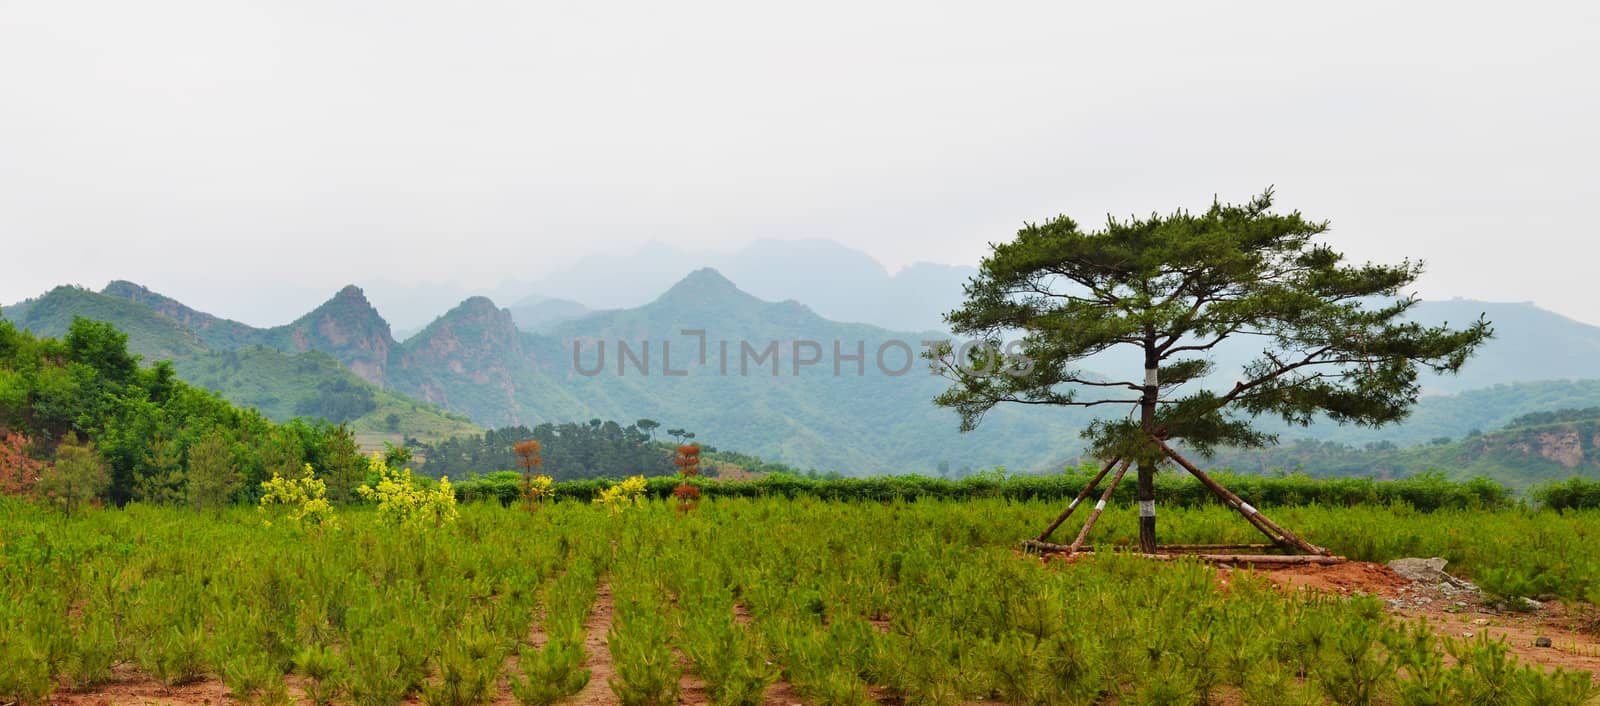 Chinese rural landscape near Beijing. Trees plantation. North China, Hebei province. Foggy white sky. Wide angle panoramic view.